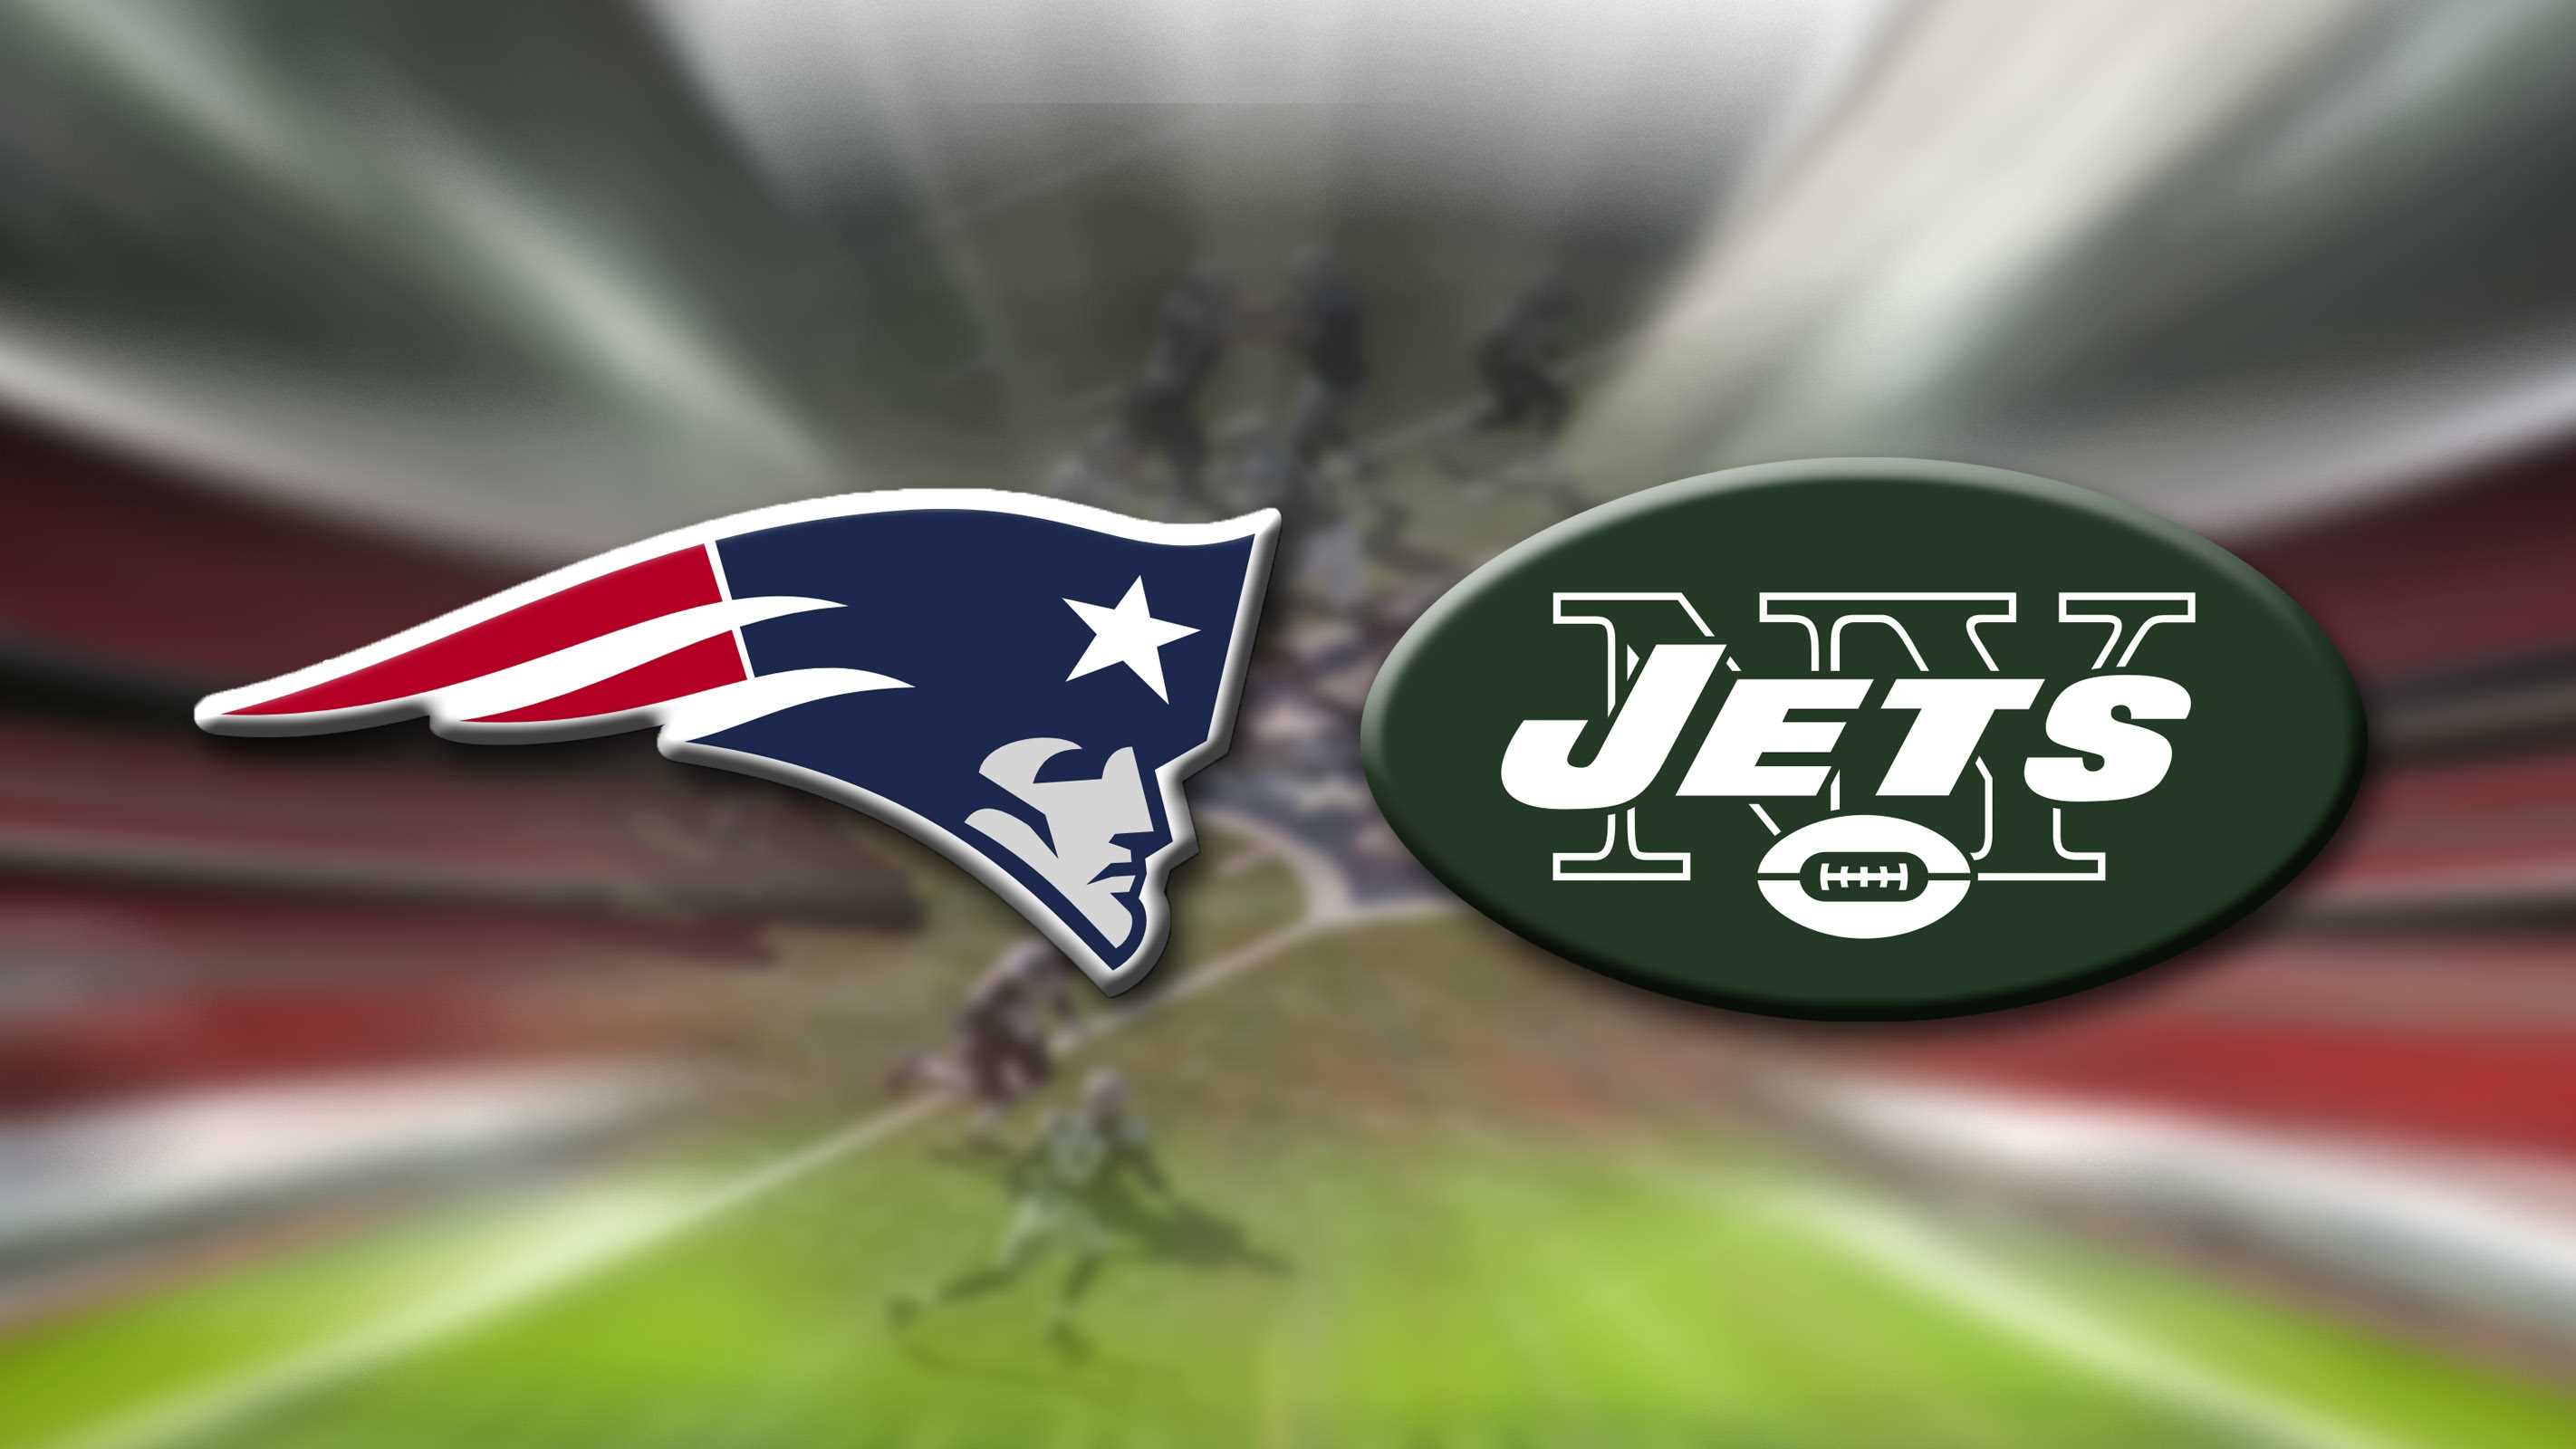 pats and jets